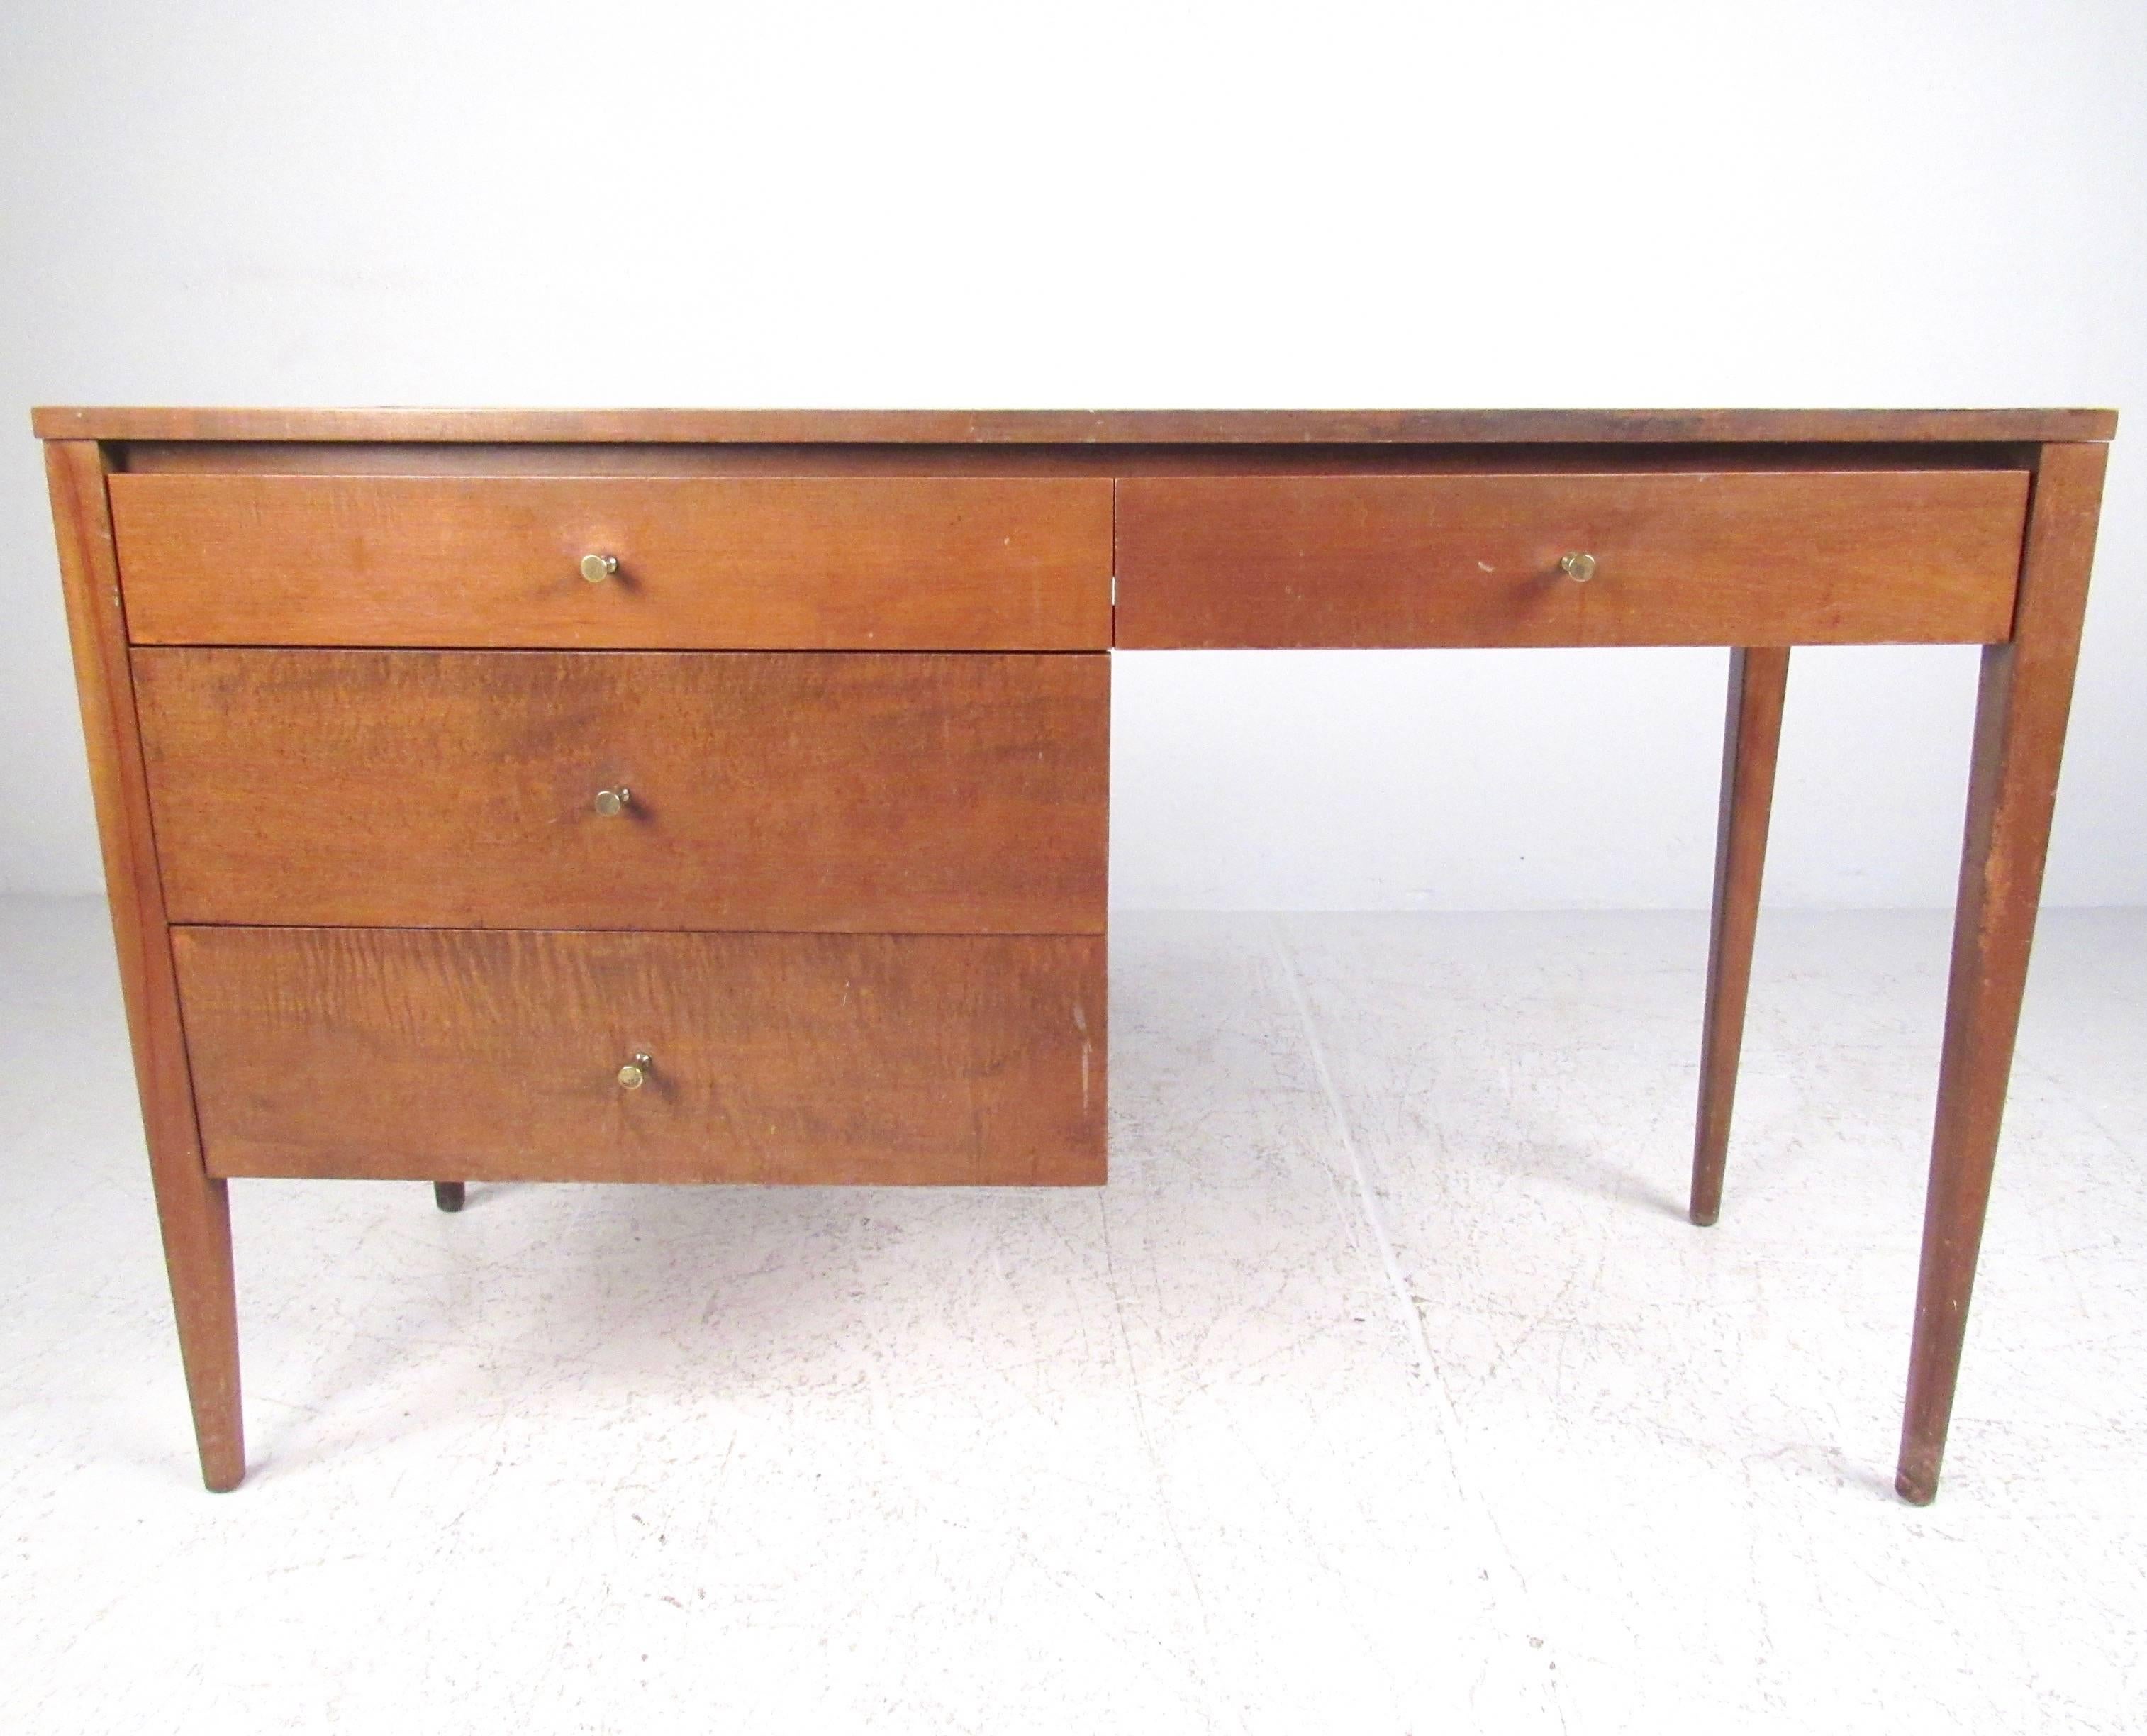 This Mid-Century Modern writing desk by Paul McCobb features a wonderful maple finish with unique brass drawer pulls. Tapered legs and spacious four drawer design make this a stylish and practical addition to home or business. Please confirm item